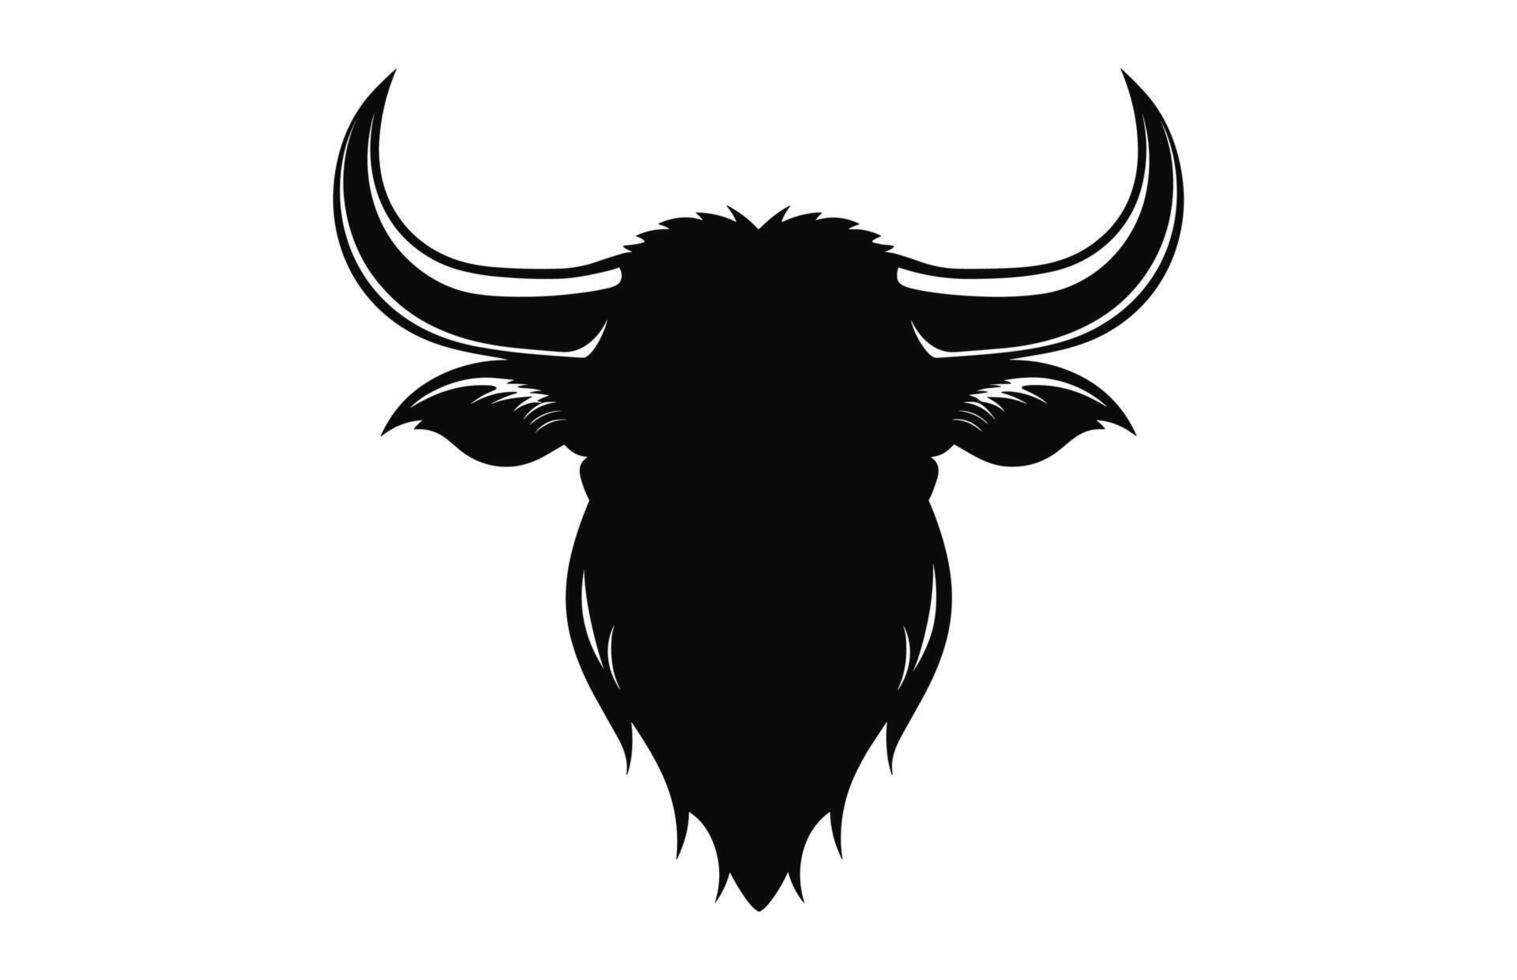 Bull Head Silhouette vector isolated on a white background